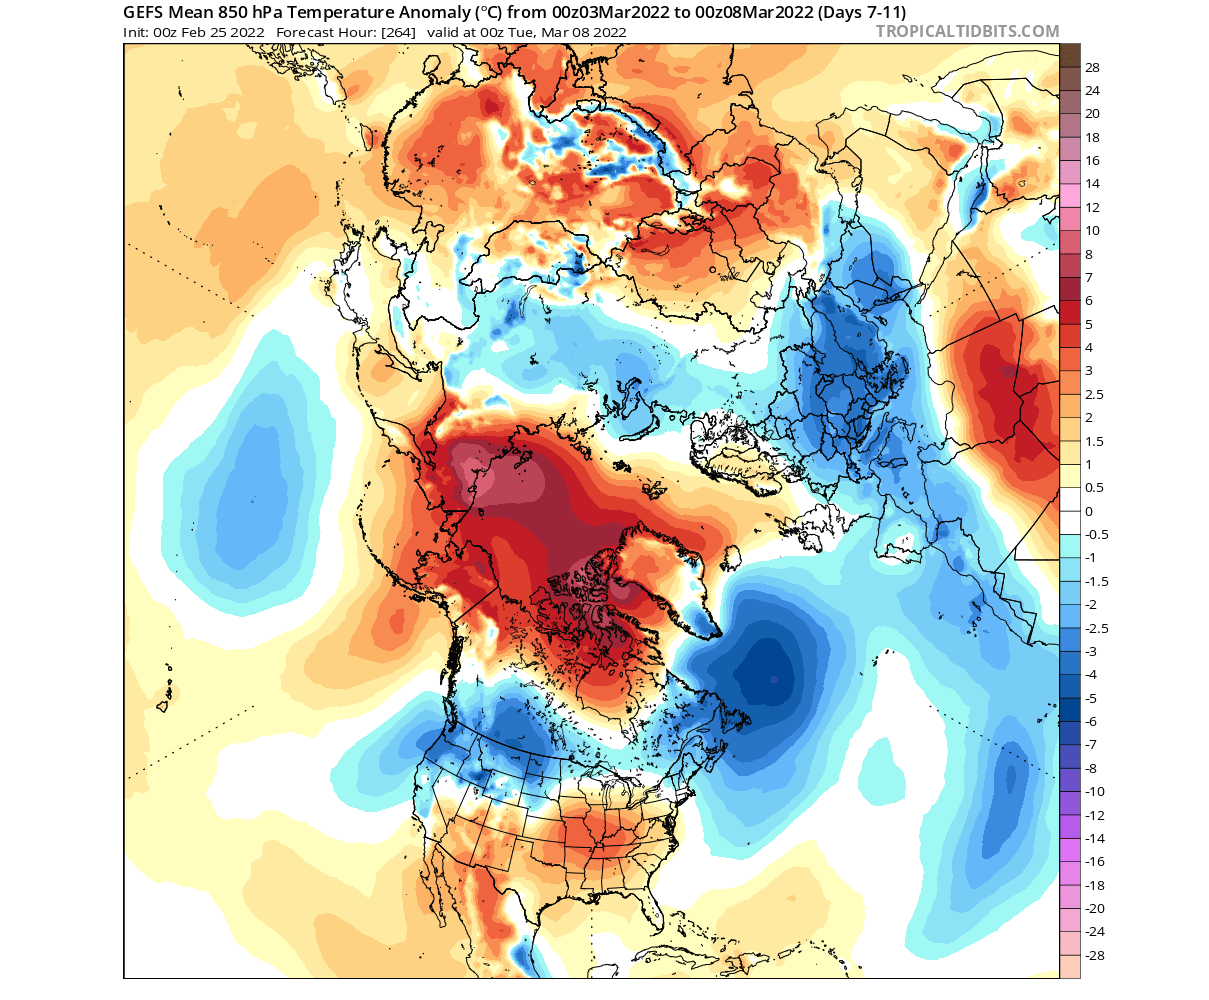 winter-weather-forecast-polar-vortex-march-2022-united-states-temperature-anomaly-early-month-cold-pattern